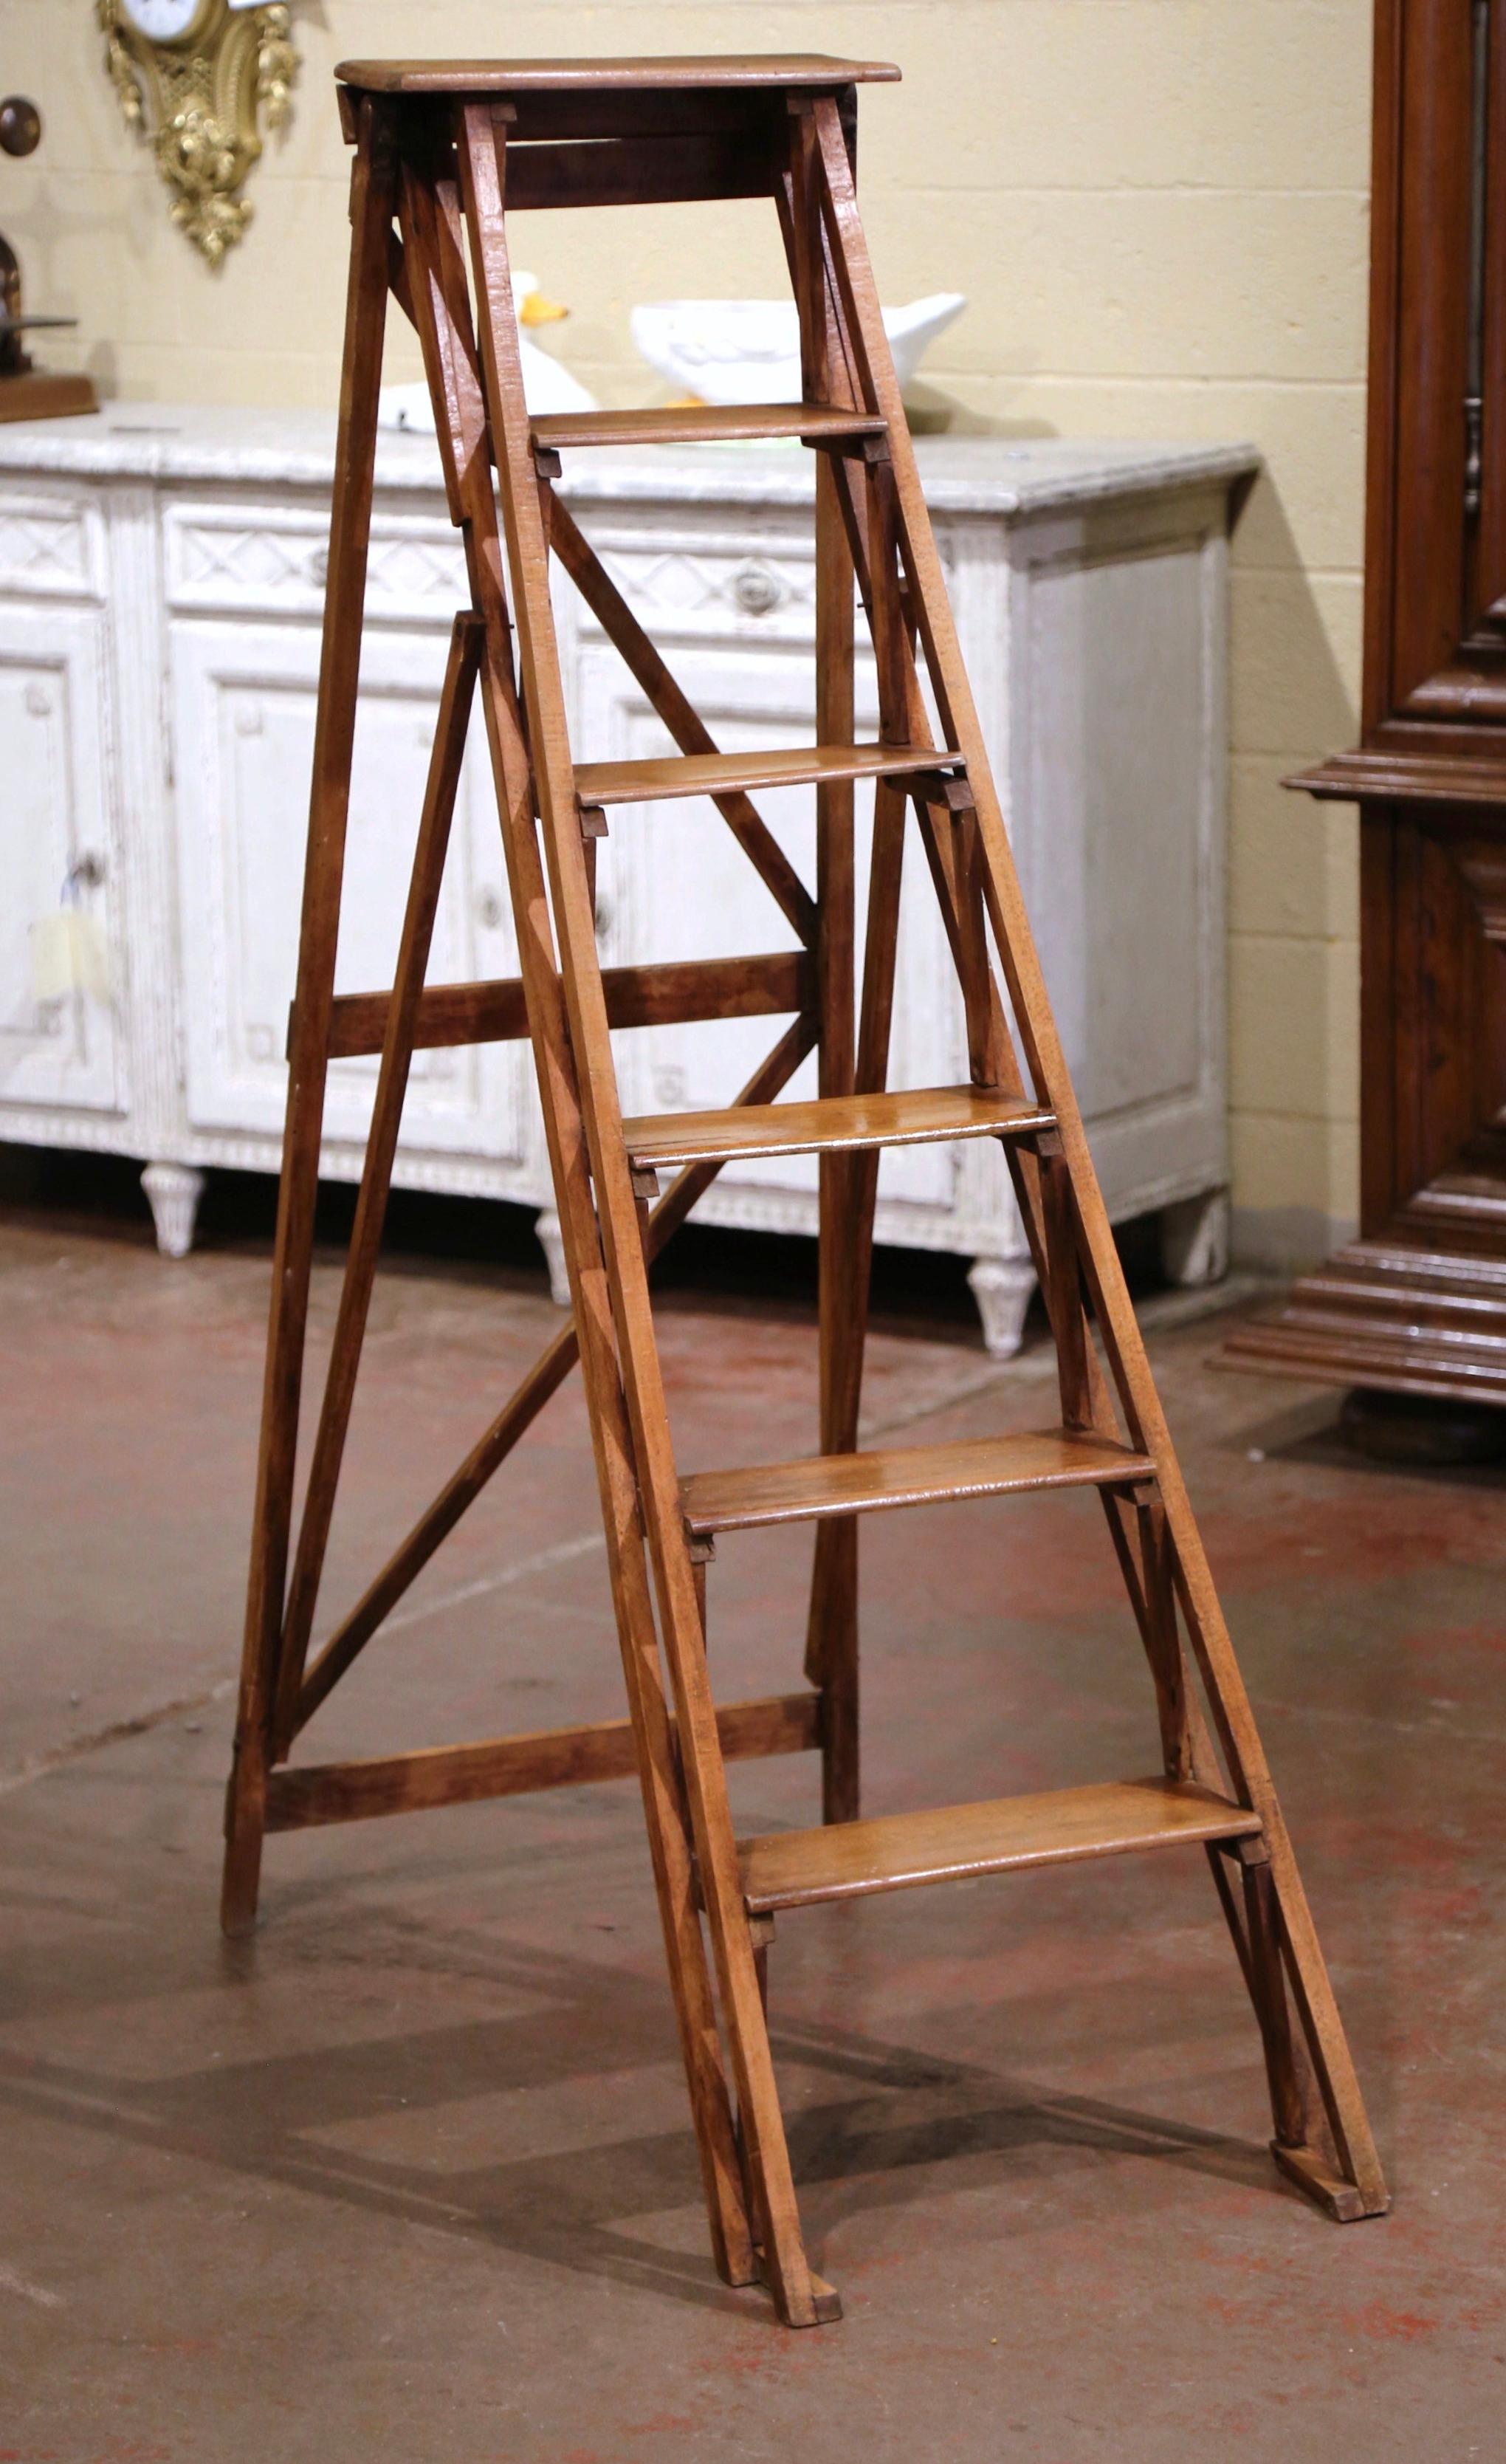 Crafted in Lyon, France circa 1880 and made of walnut, the stairs features six graduated steps to one side and connected to the opposing support with a wooden and metal action folding mechanism. Practical and useful, the ladder can folded and put